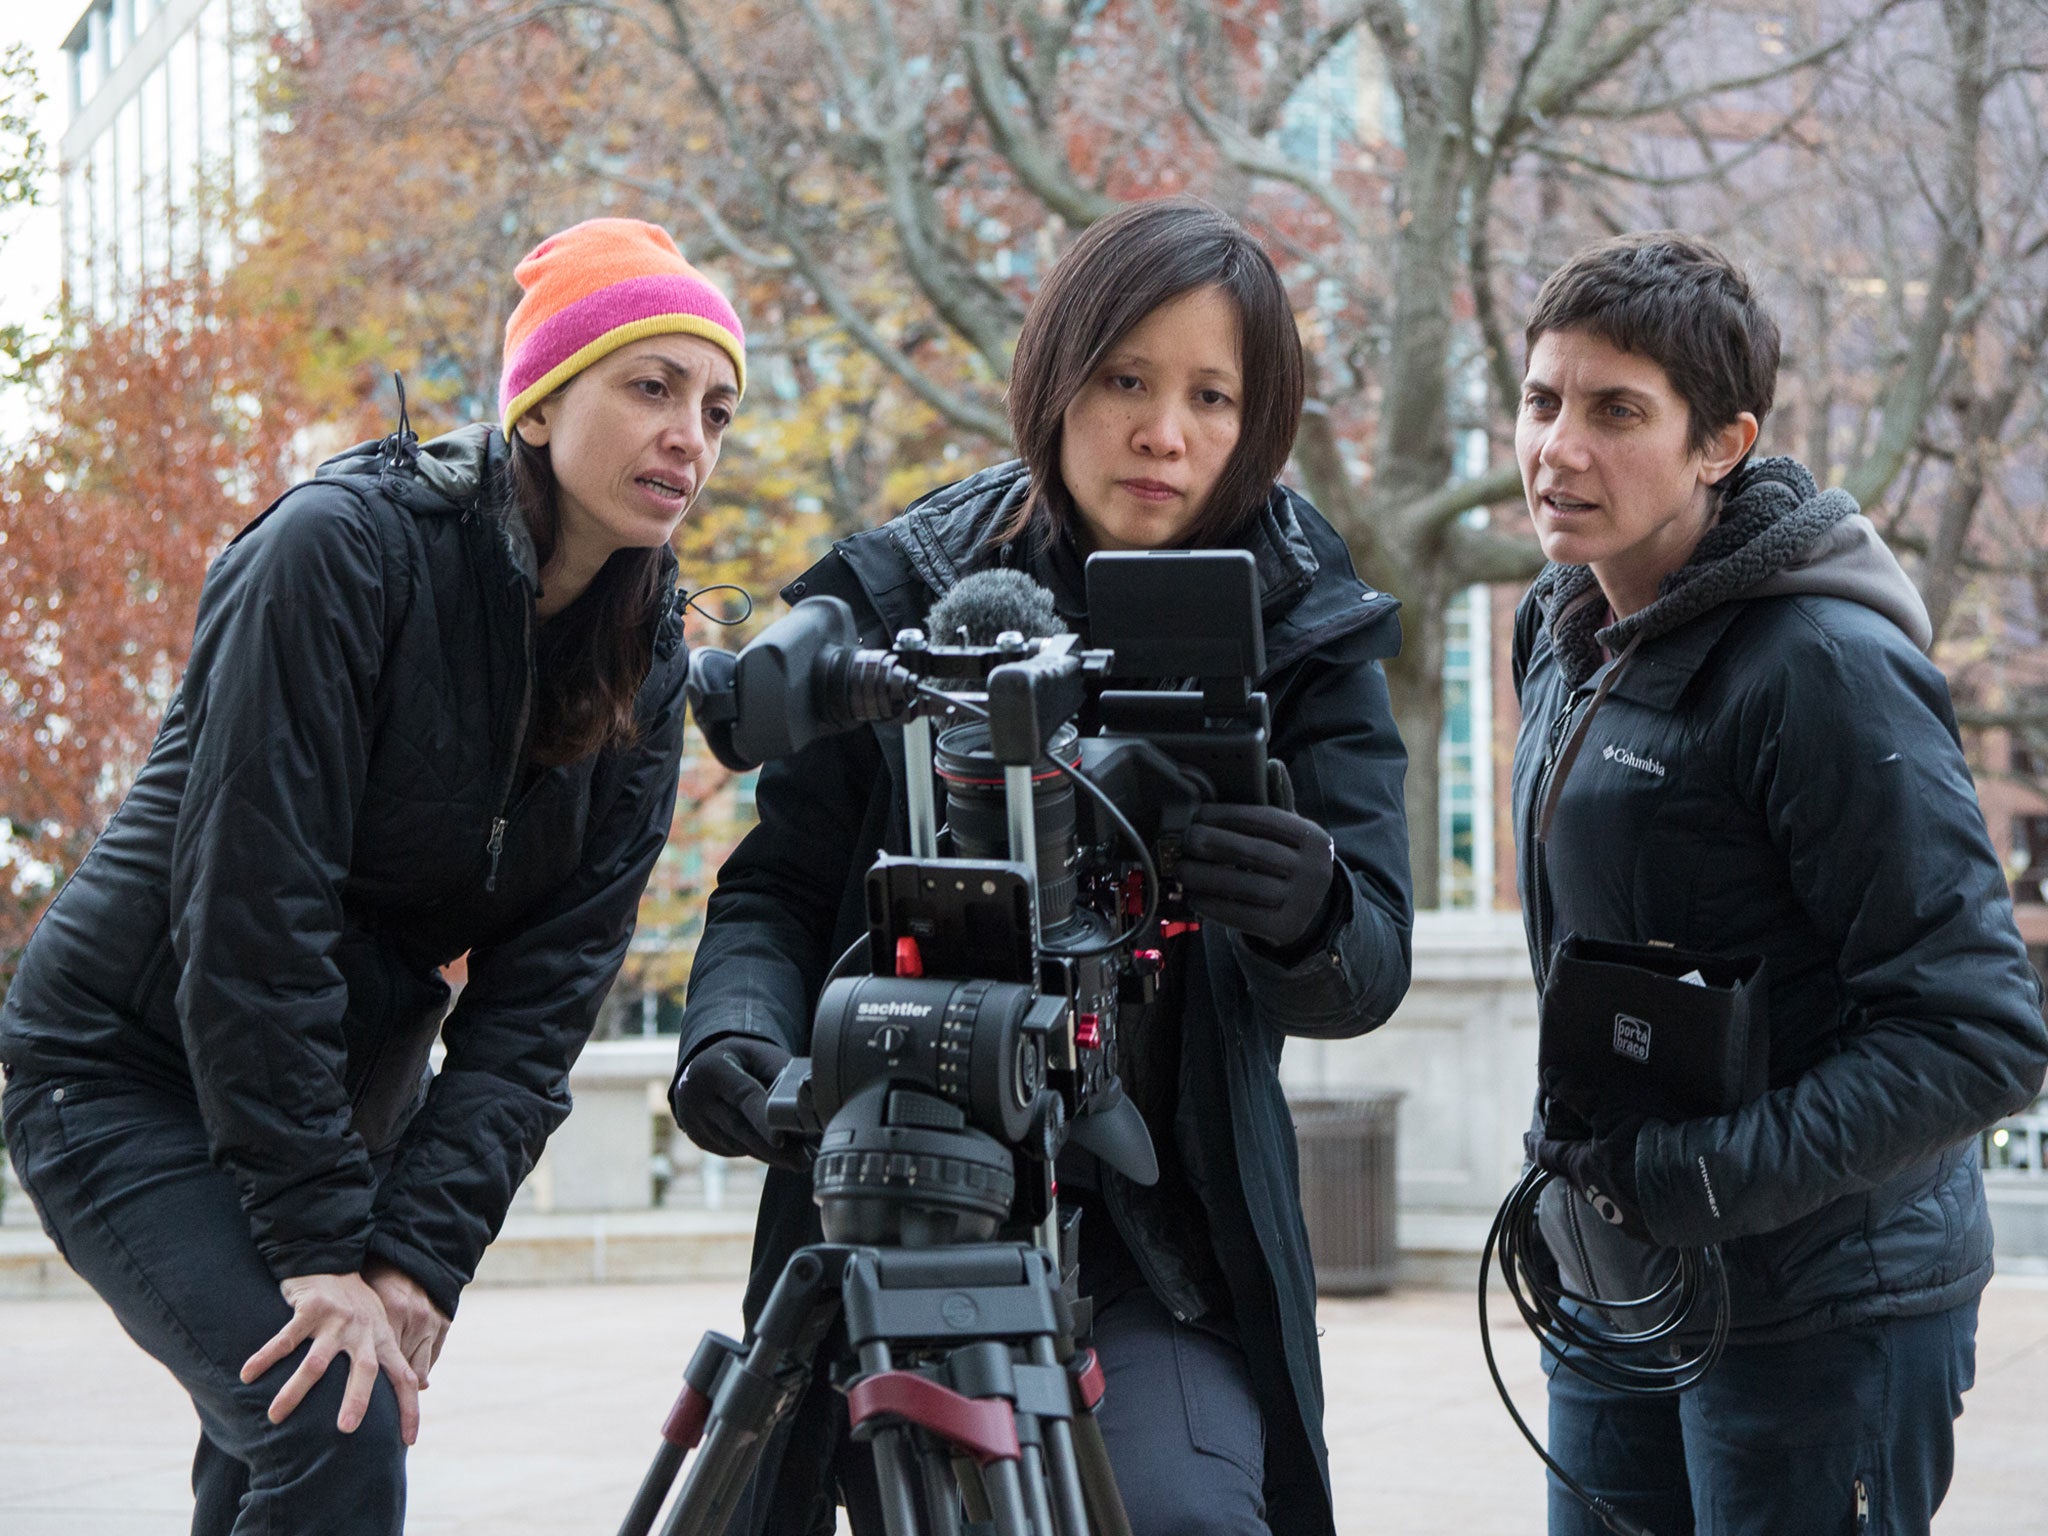 Laura Ricciardi, left, and Moira Demos, right, on the set of ‘Making A Murderer’